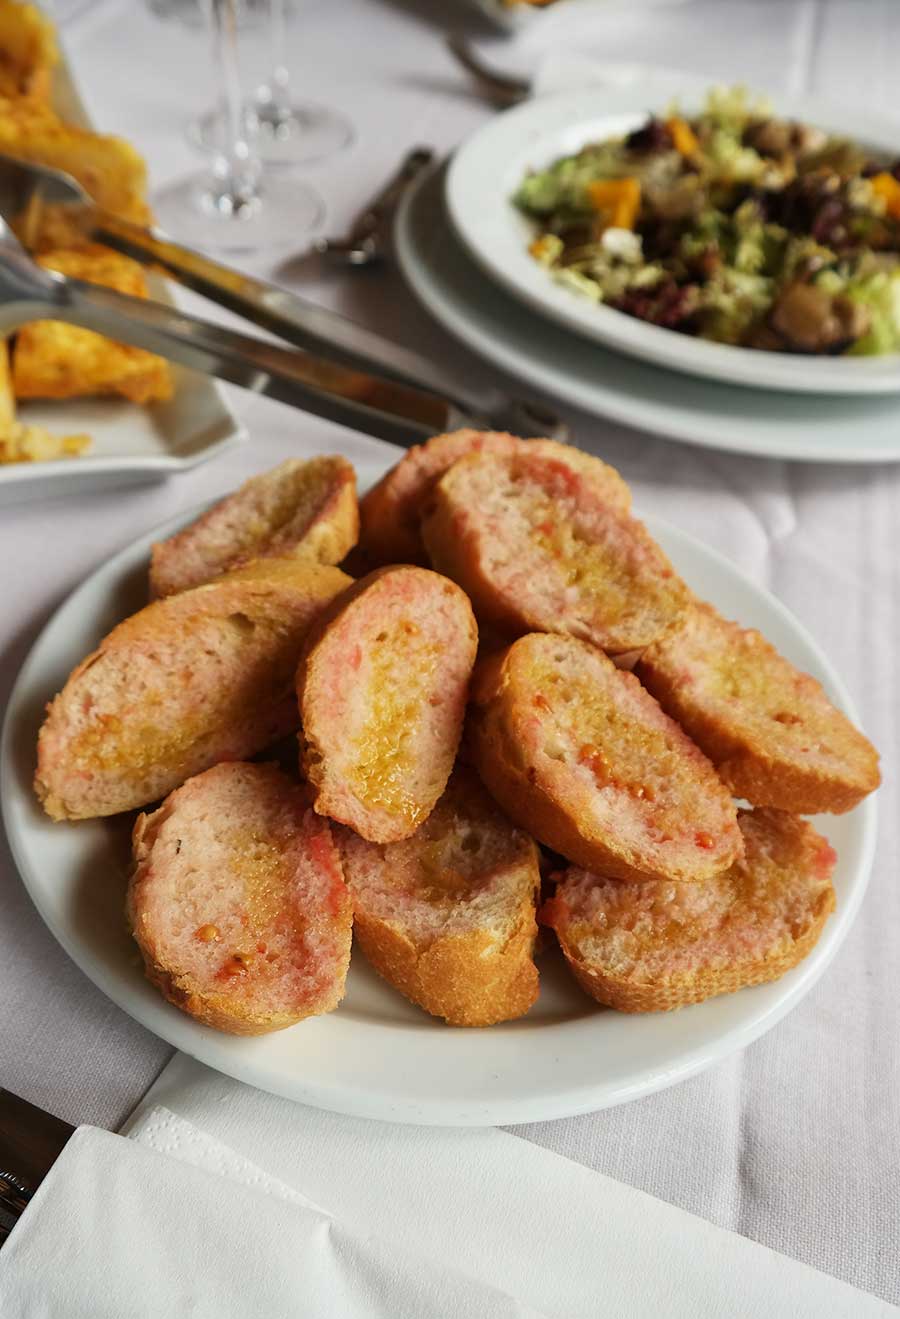 When you are planning your Garnacha Day soiree, add this Catalan recipe in your menu. It's as authentic as it gets, tastes amazing, and it's budget-friendly. Pa amb tomàquet is simply bread with tomato, known as Spanish Toast, or Catalan Toast. It is a common dish in Catalonia, even moms make it for lunch for the kids, and while it is a humble everyday dish, the Catalan tomato toast is also served on finer dinners, and it is eaten any time of the day. It was a signature dish that we were served on almost any meal during our wine trip around the region. 